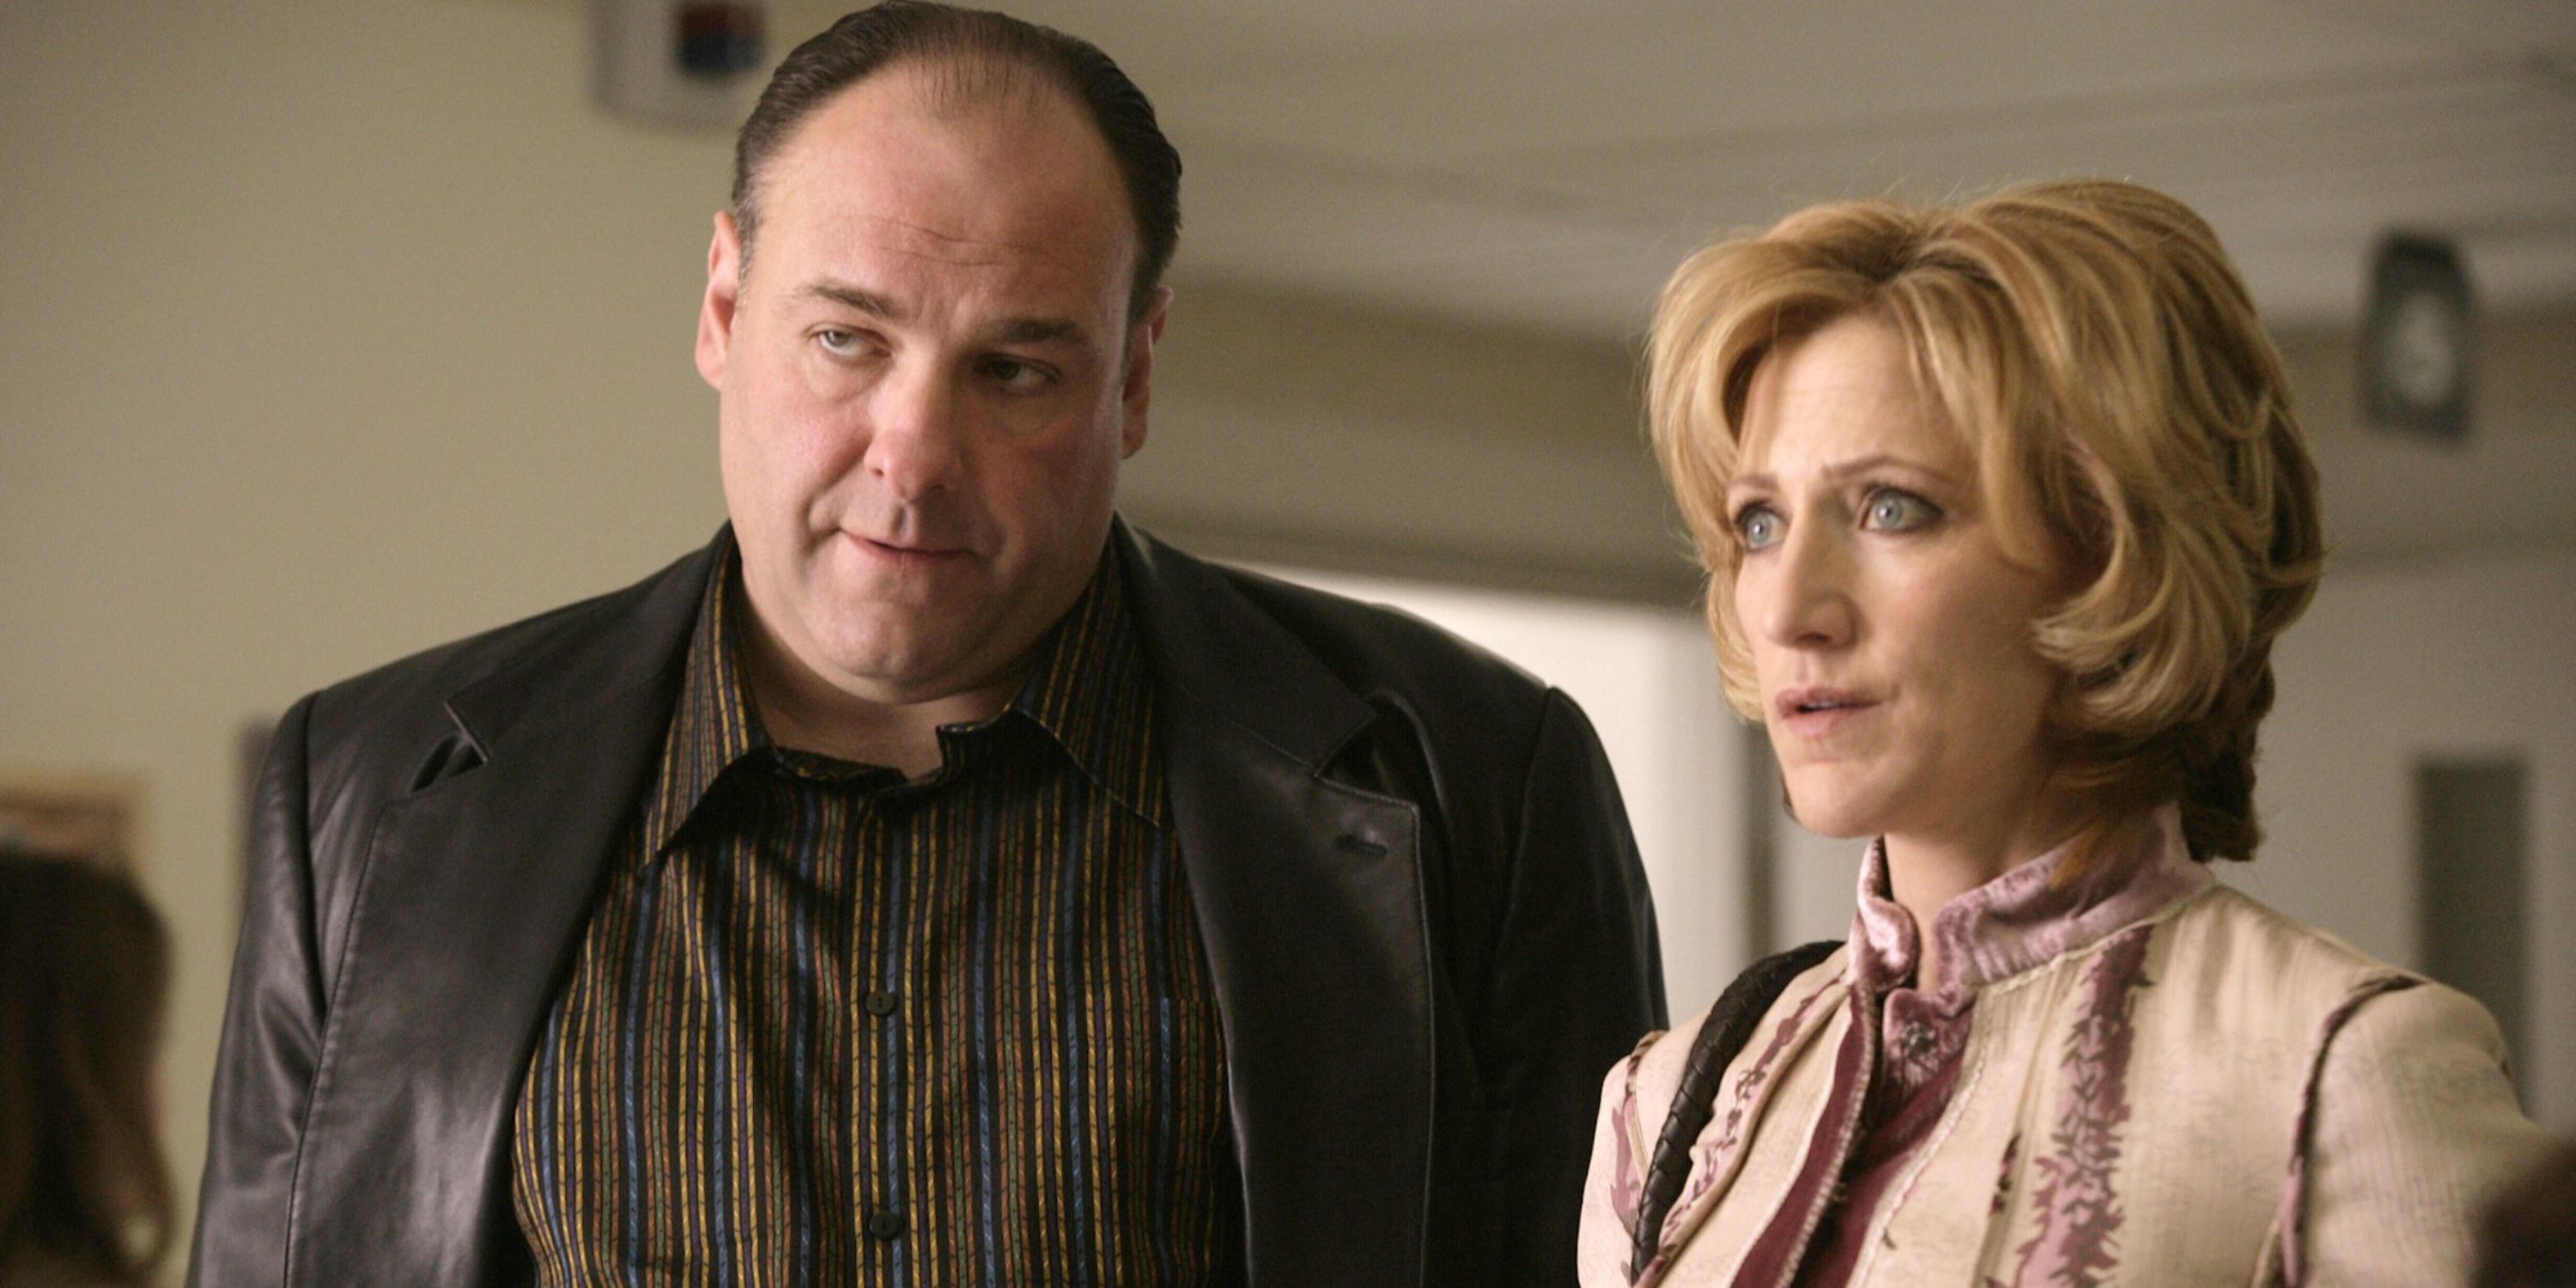 Sopranos 2 Everything We Know About The Secret Sequel